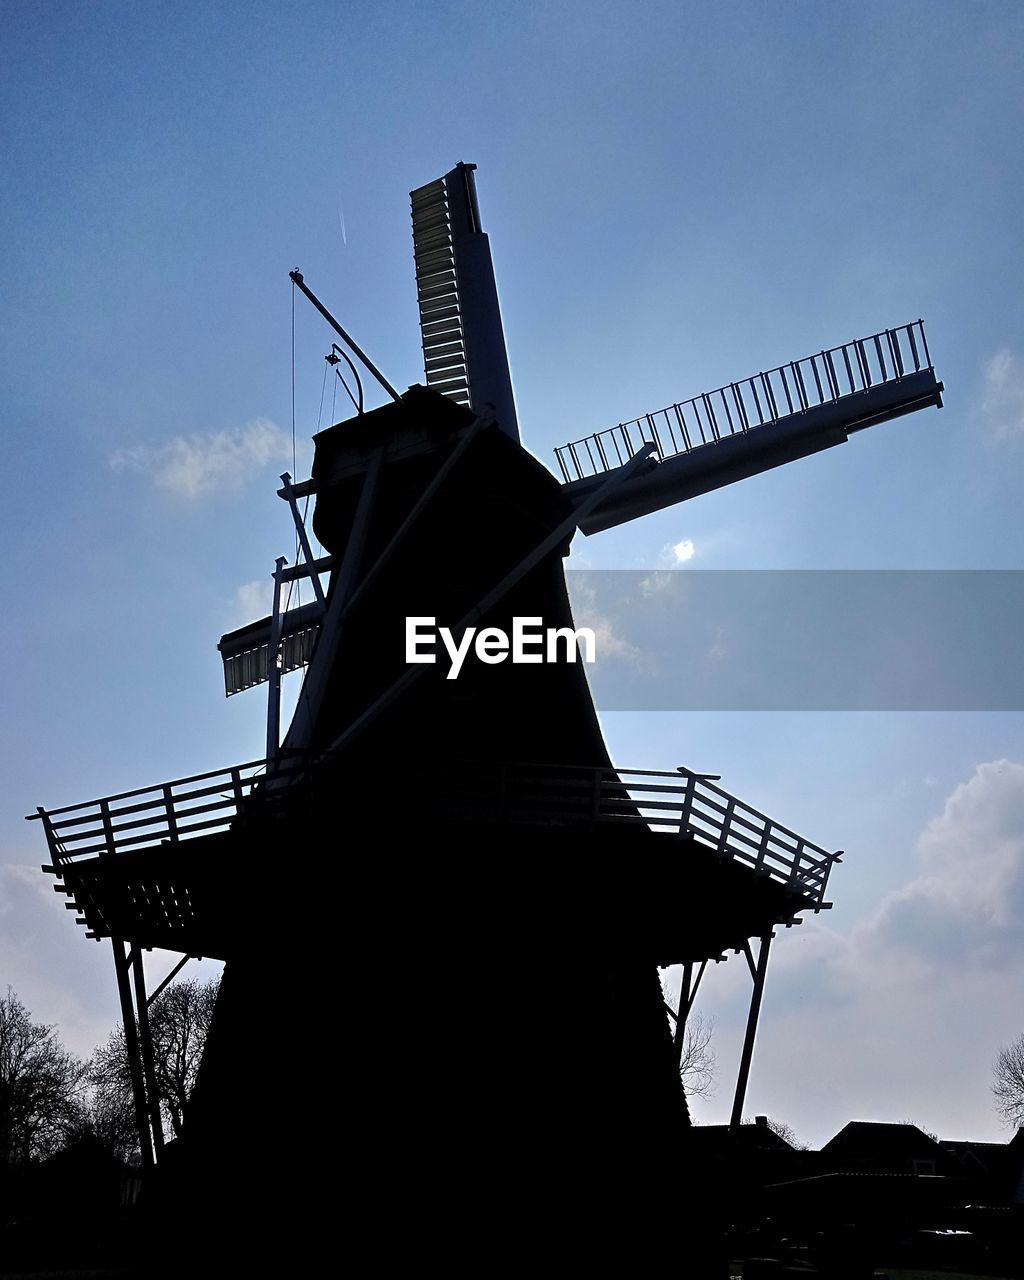 LOW ANGLE VIEW OF TRADITIONAL WINDMILL AGAINST SKY WITH SILHOUETTE WINDMILLS